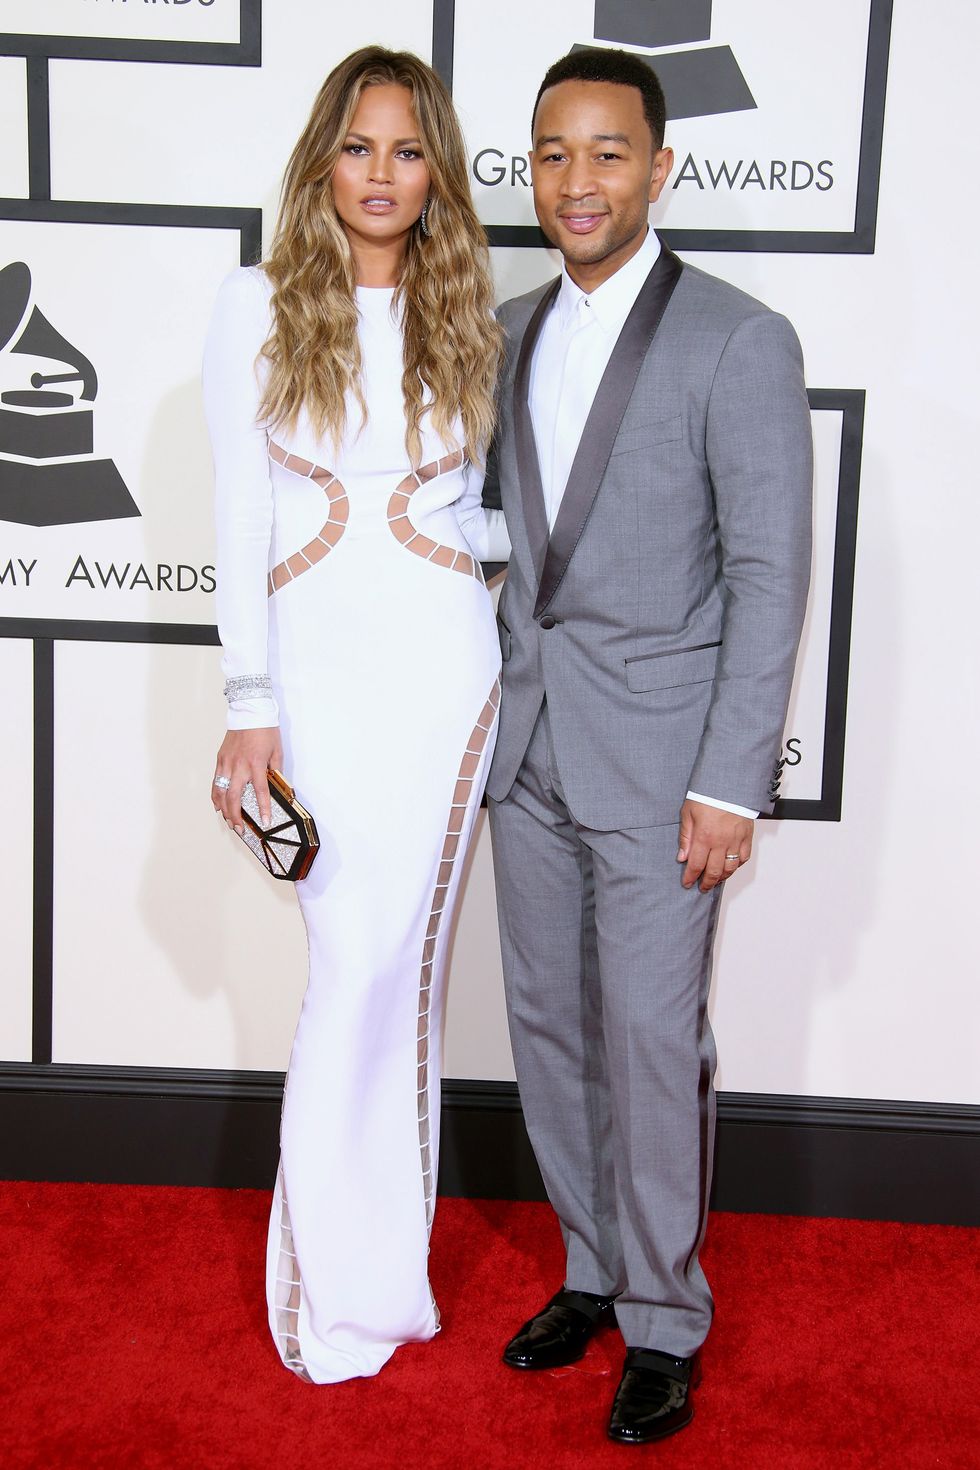 LOS ANGELES, CA - FEBRUARY 08: Chrissie Teigen and John Legend (R) attend The 57th Annual GRAMMY Awards at the STAPLES Center on February 8, 2015 in Los Angeles, California. (Photo by Dan MacMedan/WireImage)